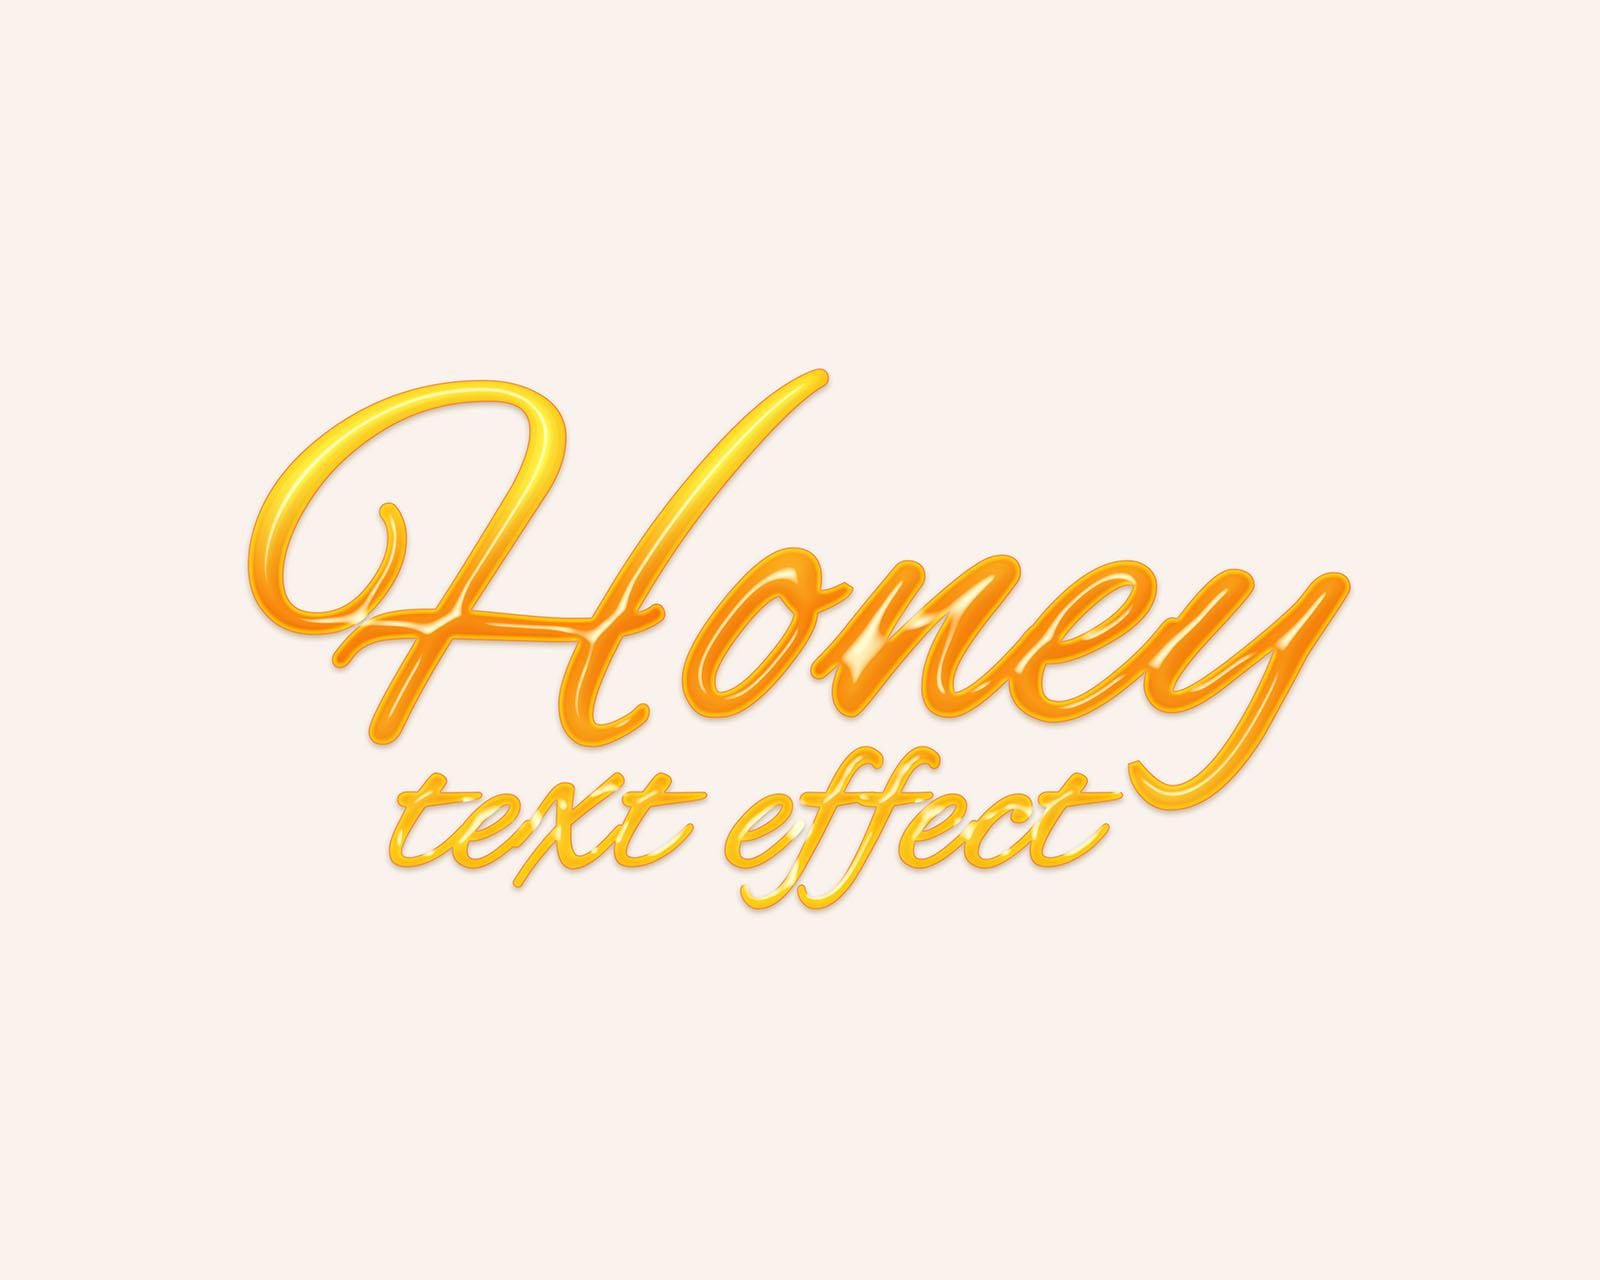 Photoshop honey text effects and styles